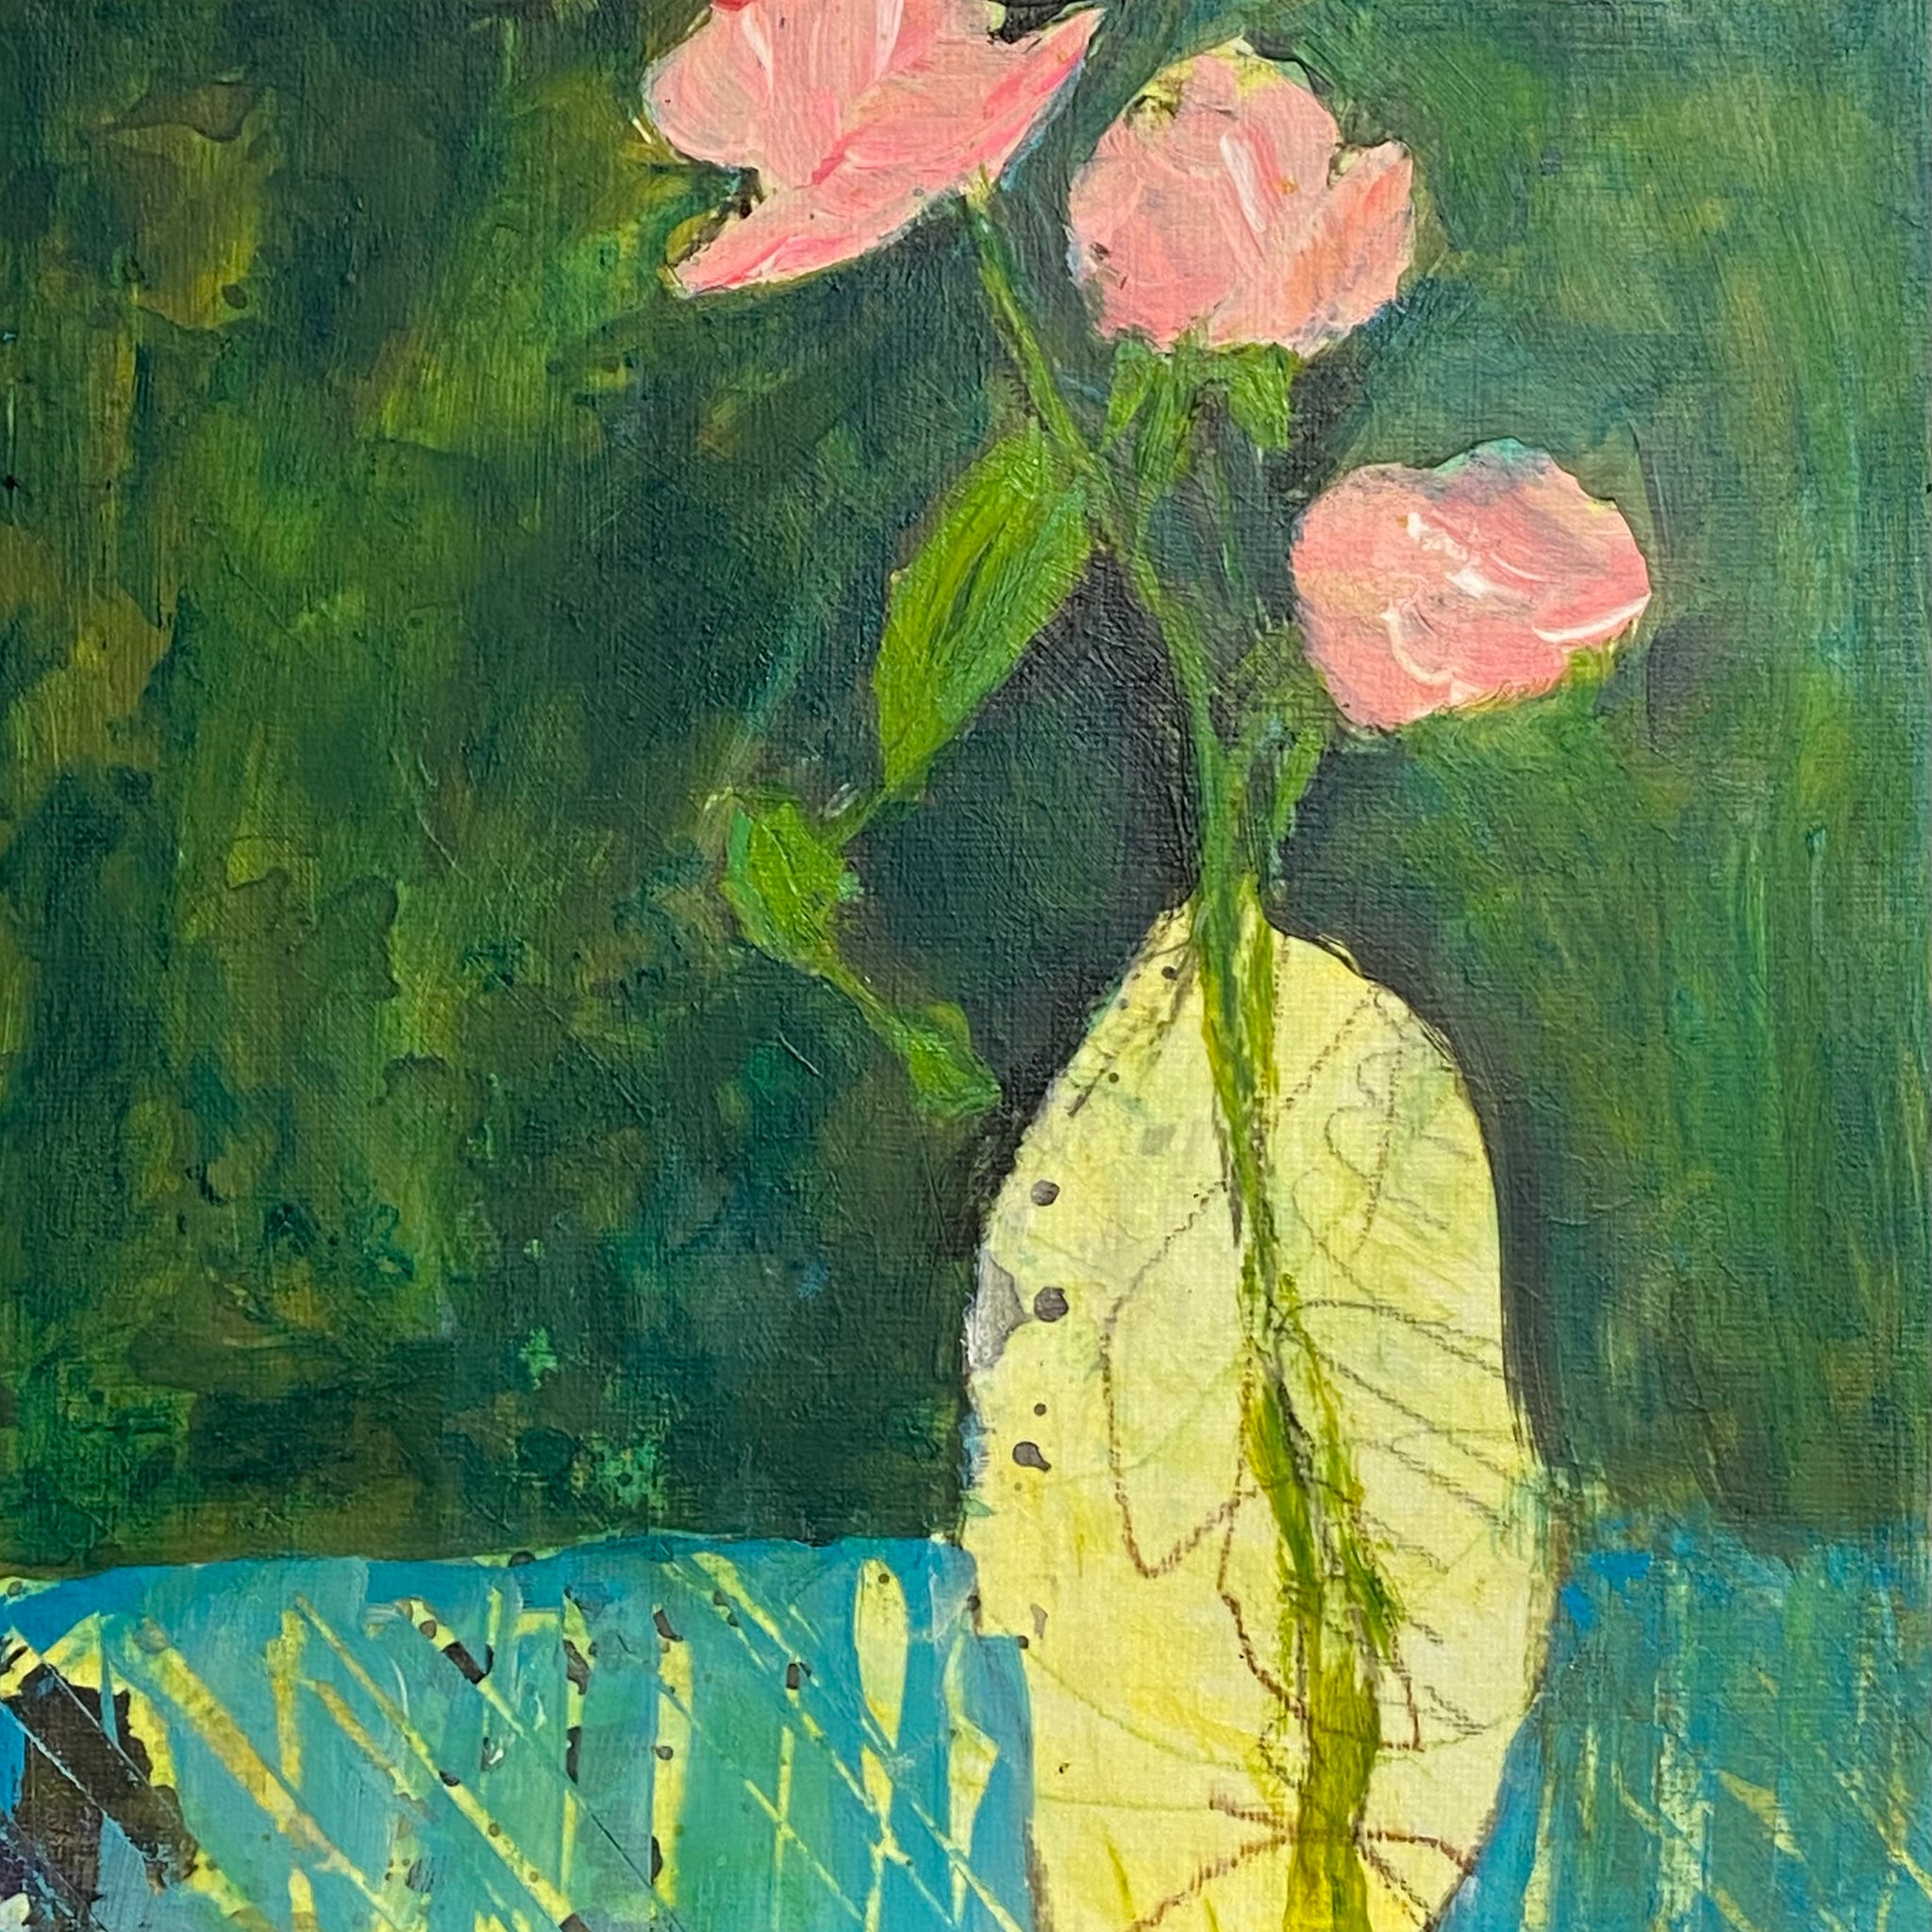 Juanita Bellavance, Pink roses, 2022, Acrylic on canvas board, 8 x 8 inches